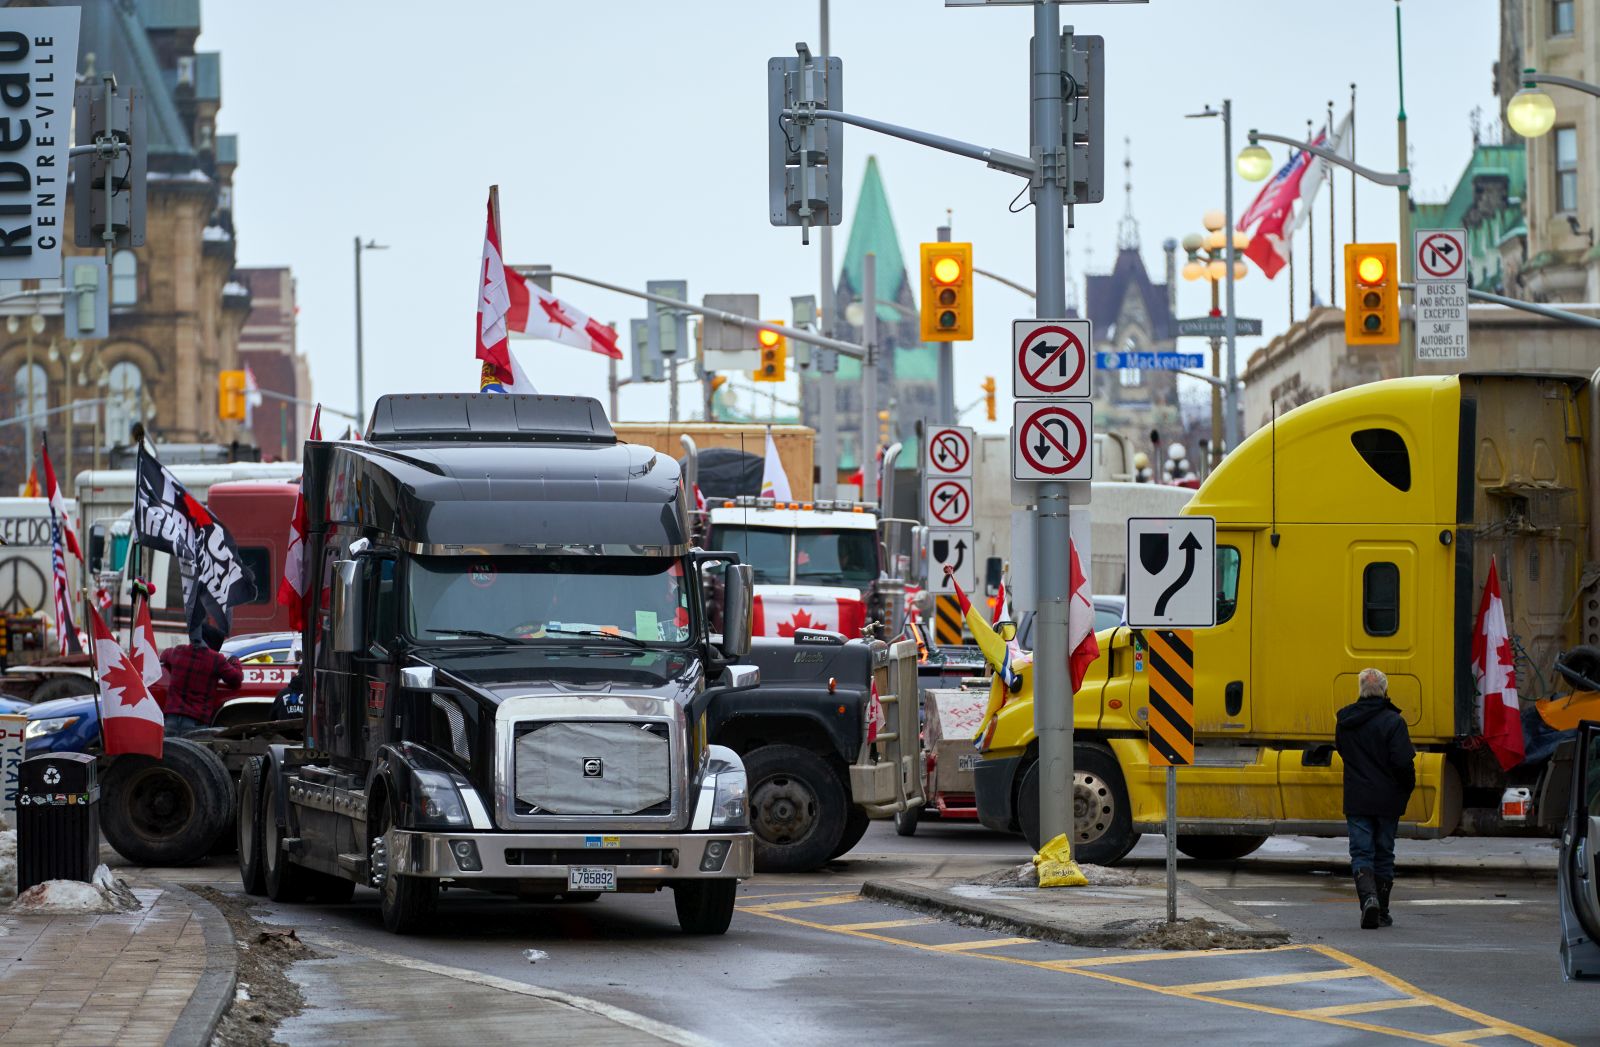 epa09747449 A view of Wellington street as truckers block the streets near the parlement hill during a protest against the vaccine mandates in downtown Ottawa, Ontario, Canada, 11 February 2022. Truckers continue their protest against the mandate by the Canadian government for mandatory vaccines against COVID-19 to be able to return to Canada. A state of emergency was declared in the city of Ottawa on 06 February 2022 and policemen from Ottawa city, Ontario, and the Federal Royal Canadian Mounted Police (RCMP) are deployed on 11 February 2022.  EPA/ANDRE PICHETTE